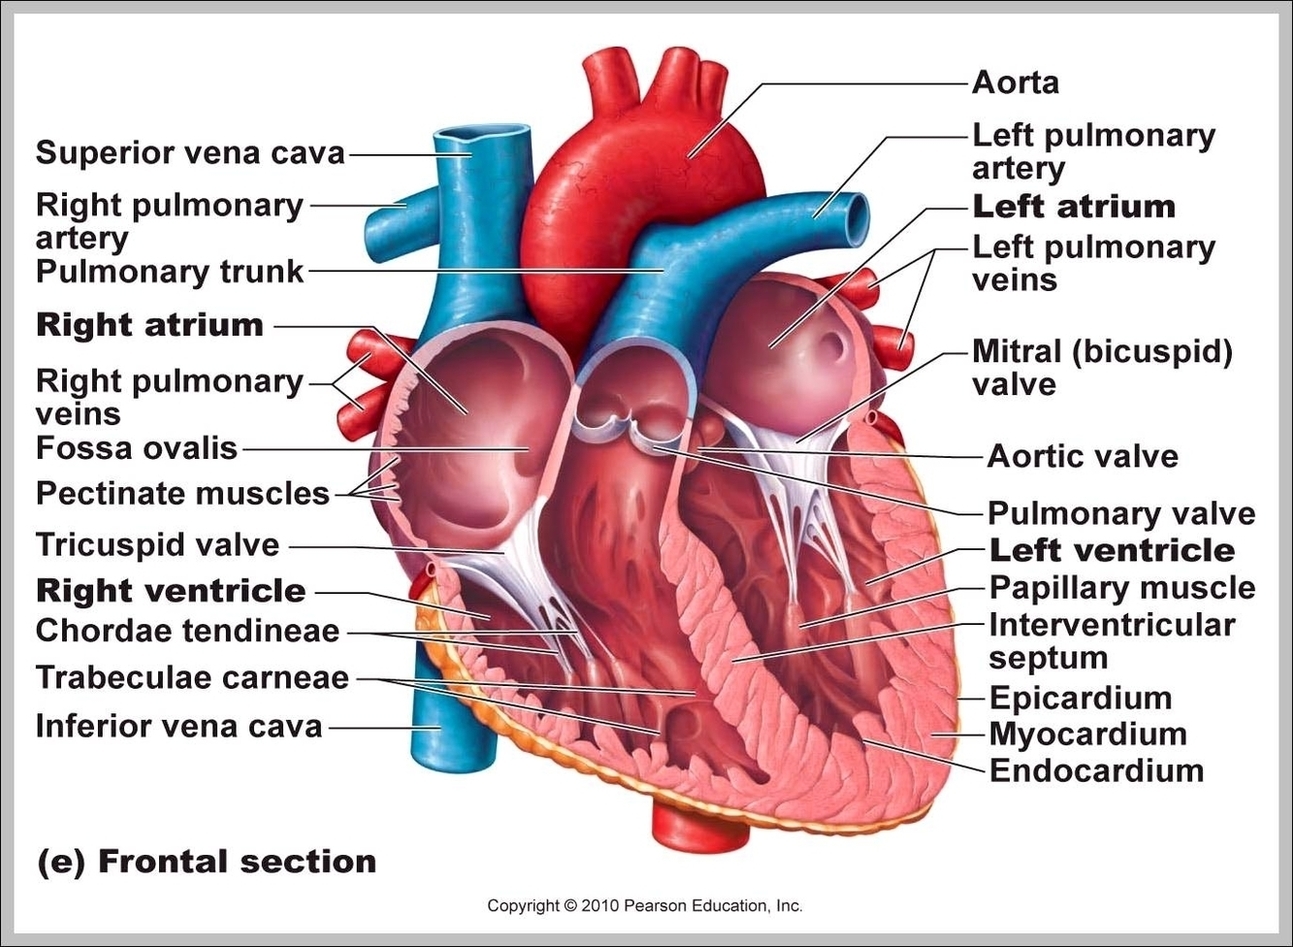 Labeled Human Heart Image